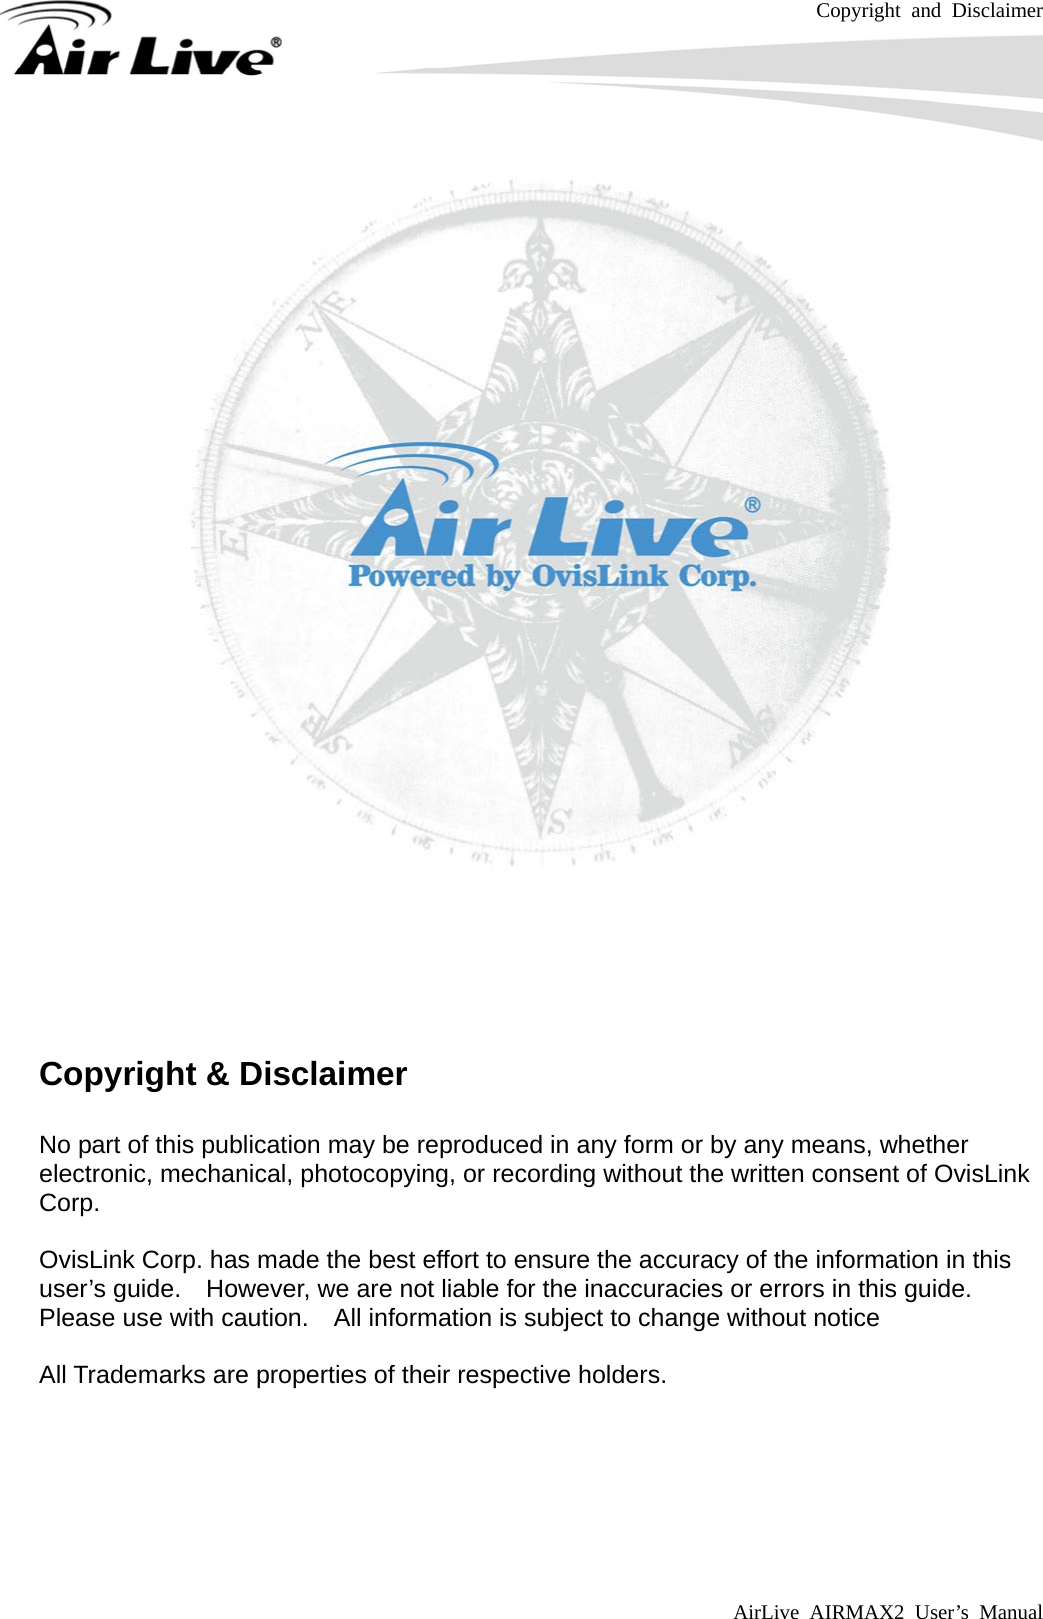 Copyright and Disclaimer AirLive AIRMAX2 User’s Manual           Copyright &amp; Disclaimer  No part of this publication may be reproduced in any form or by any means, whether electronic, mechanical, photocopying, or recording without the written consent of OvisLink Corp.   OvisLink Corp. has made the best effort to ensure the accuracy of the information in this user’s guide.    However, we are not liable for the inaccuracies or errors in this guide.   Please use with caution.    All information is subject to change without notice  All Trademarks are properties of their respective holders.       